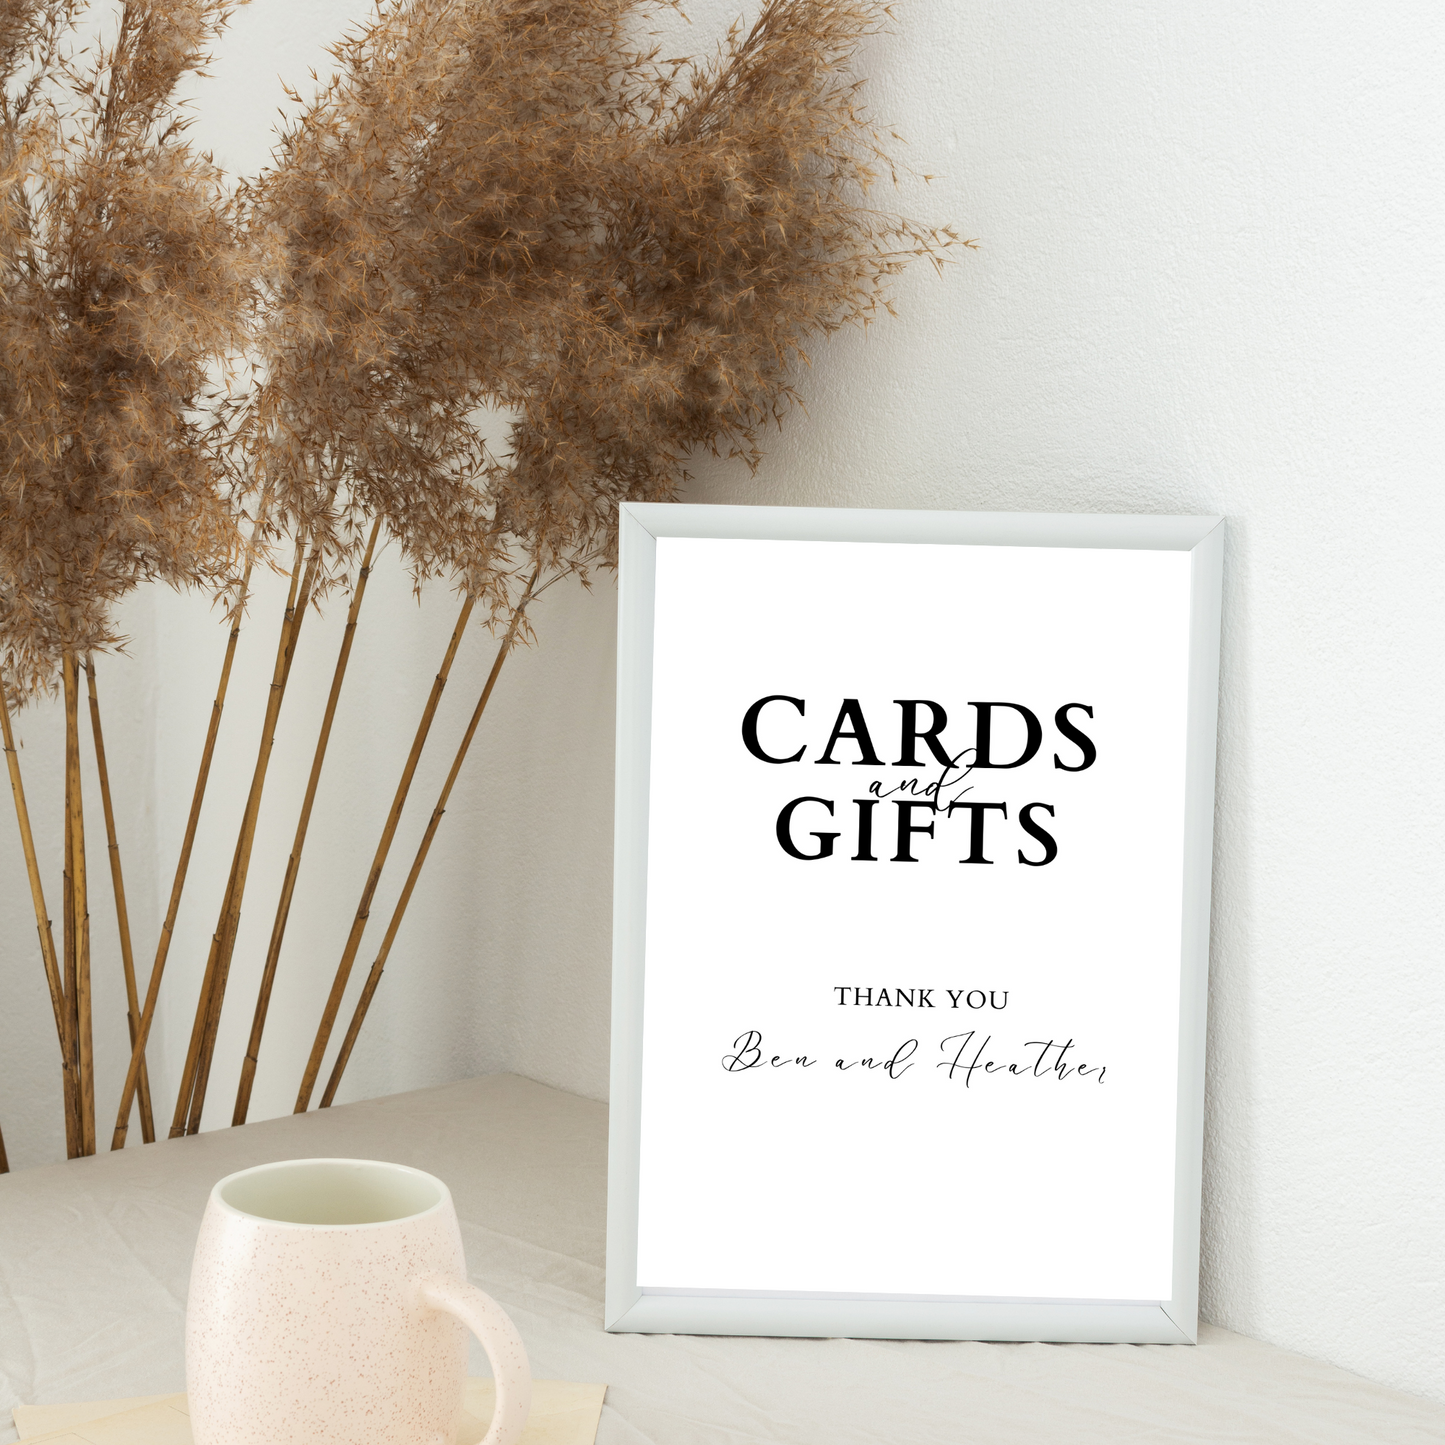 Minimalist Cards and Gifts Sign | Editable Cards and Gifts Wedding Sign | Wedding Sign | Simple Gifts Sign | DIY Canva Template |